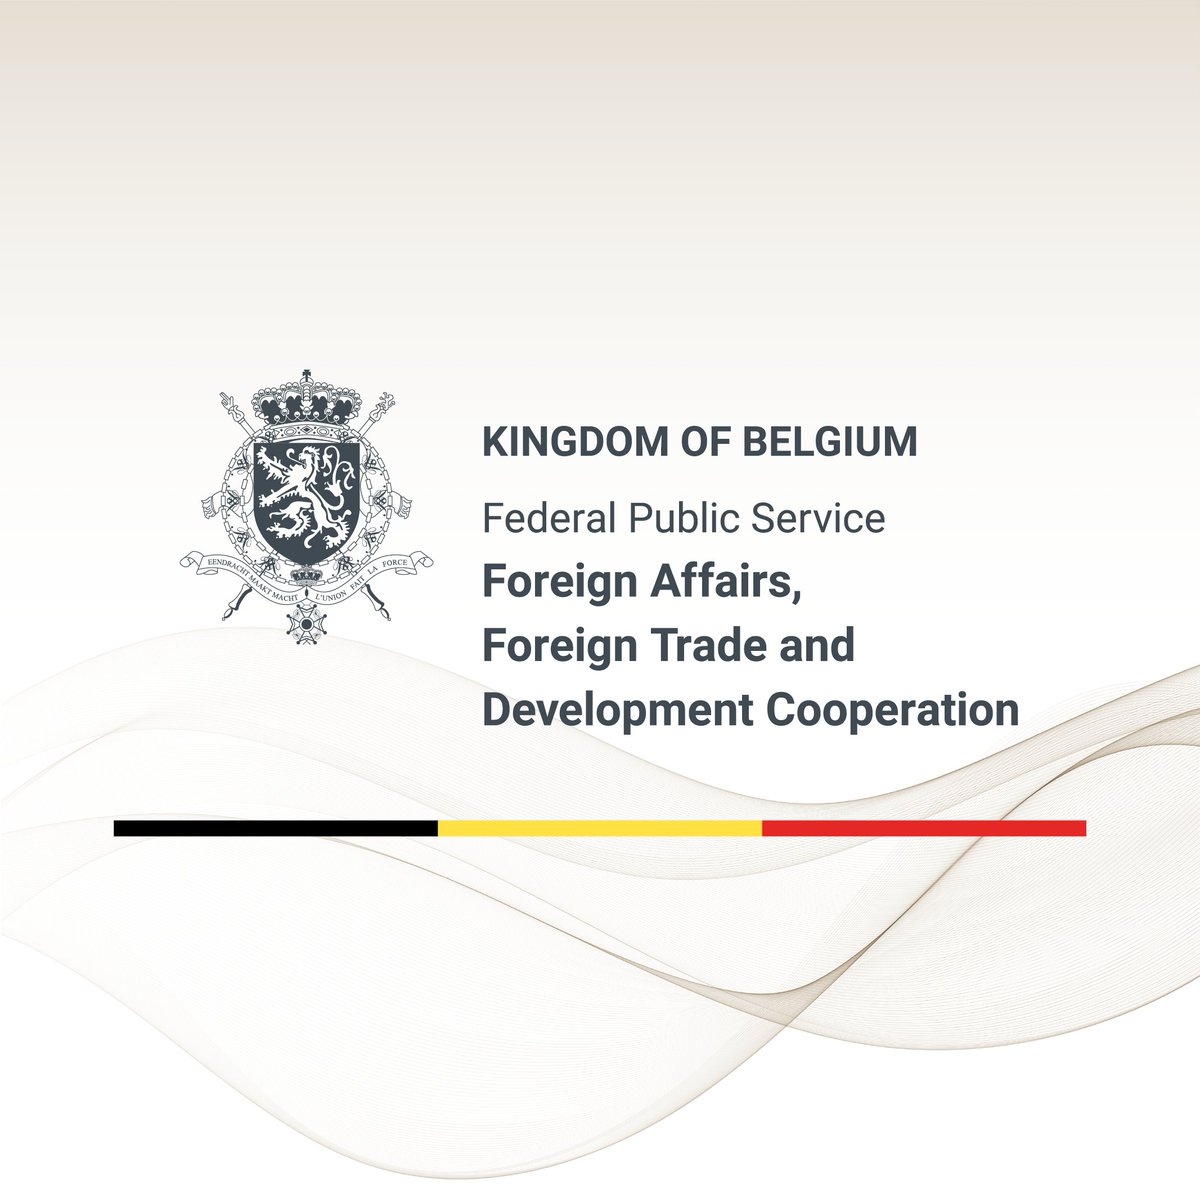 🇧🇪 Belgium offers its deepest condolences to Kenya, Tanzania, Burundi and Somalia after severe floods have provoked important damages in their countries. Our thoughts are with the families of the victims and the people affected by this catastrophe. [1/3] ⤵️